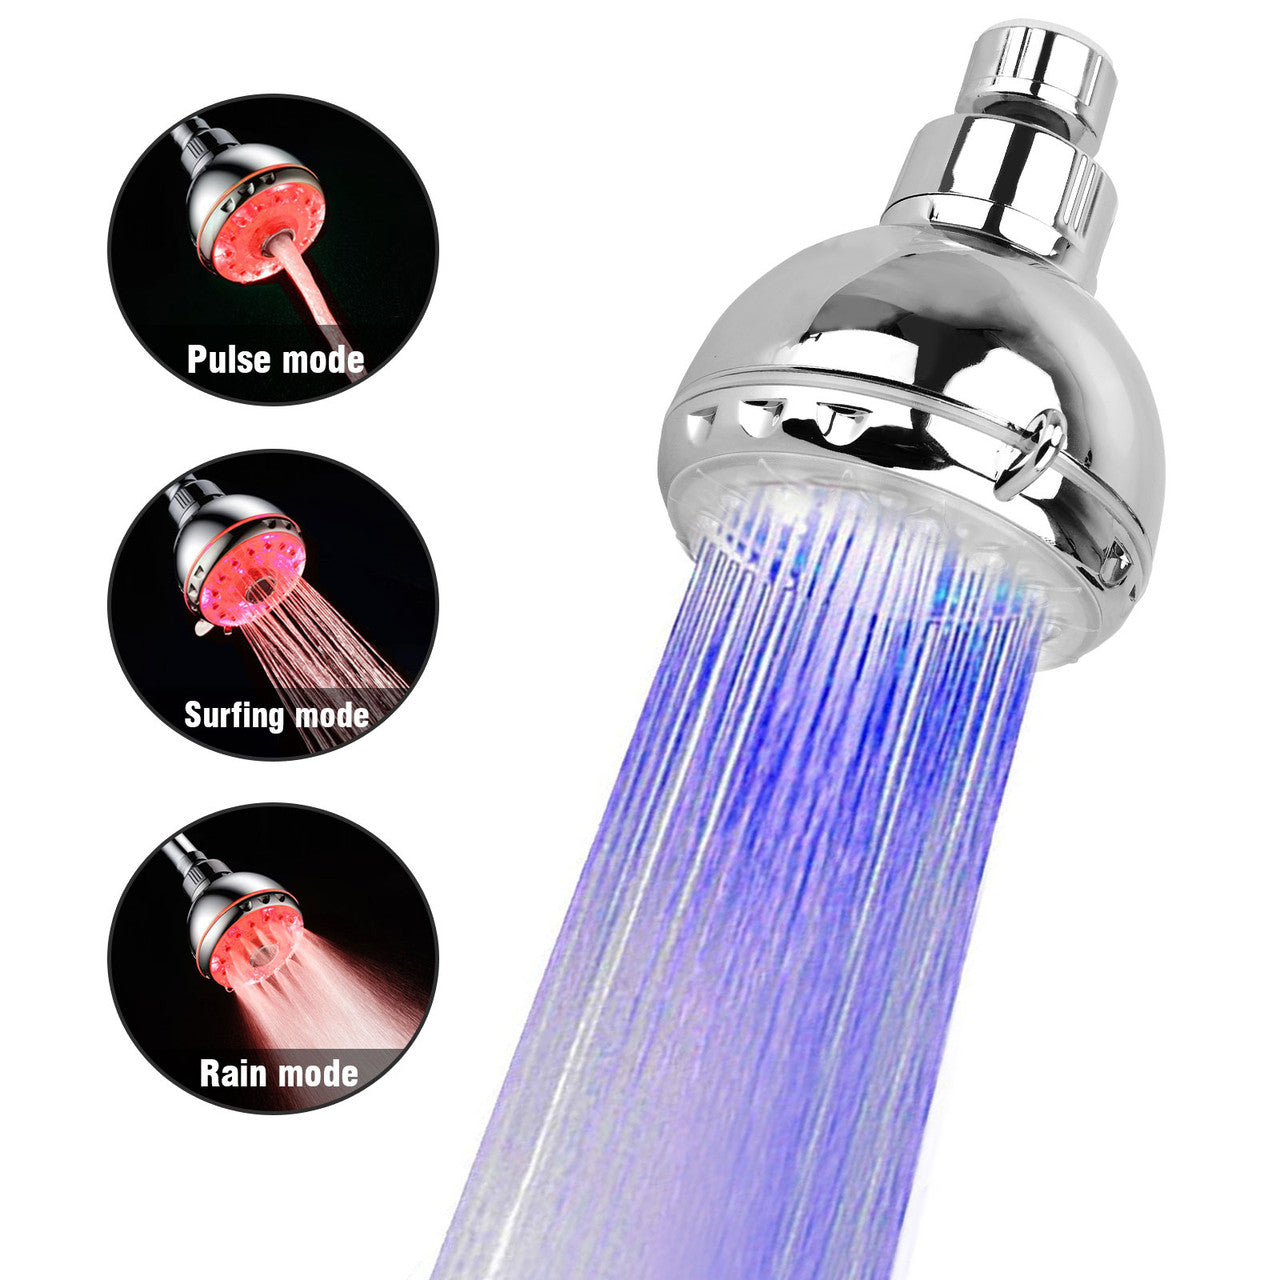 High Pressure LED Handheld Shower Head- Water Temperature Controlled Automatically Color Changing, 3 Spray Modes 360 Degree Rotatable-7 Colors LED Light Shower Head Replacement